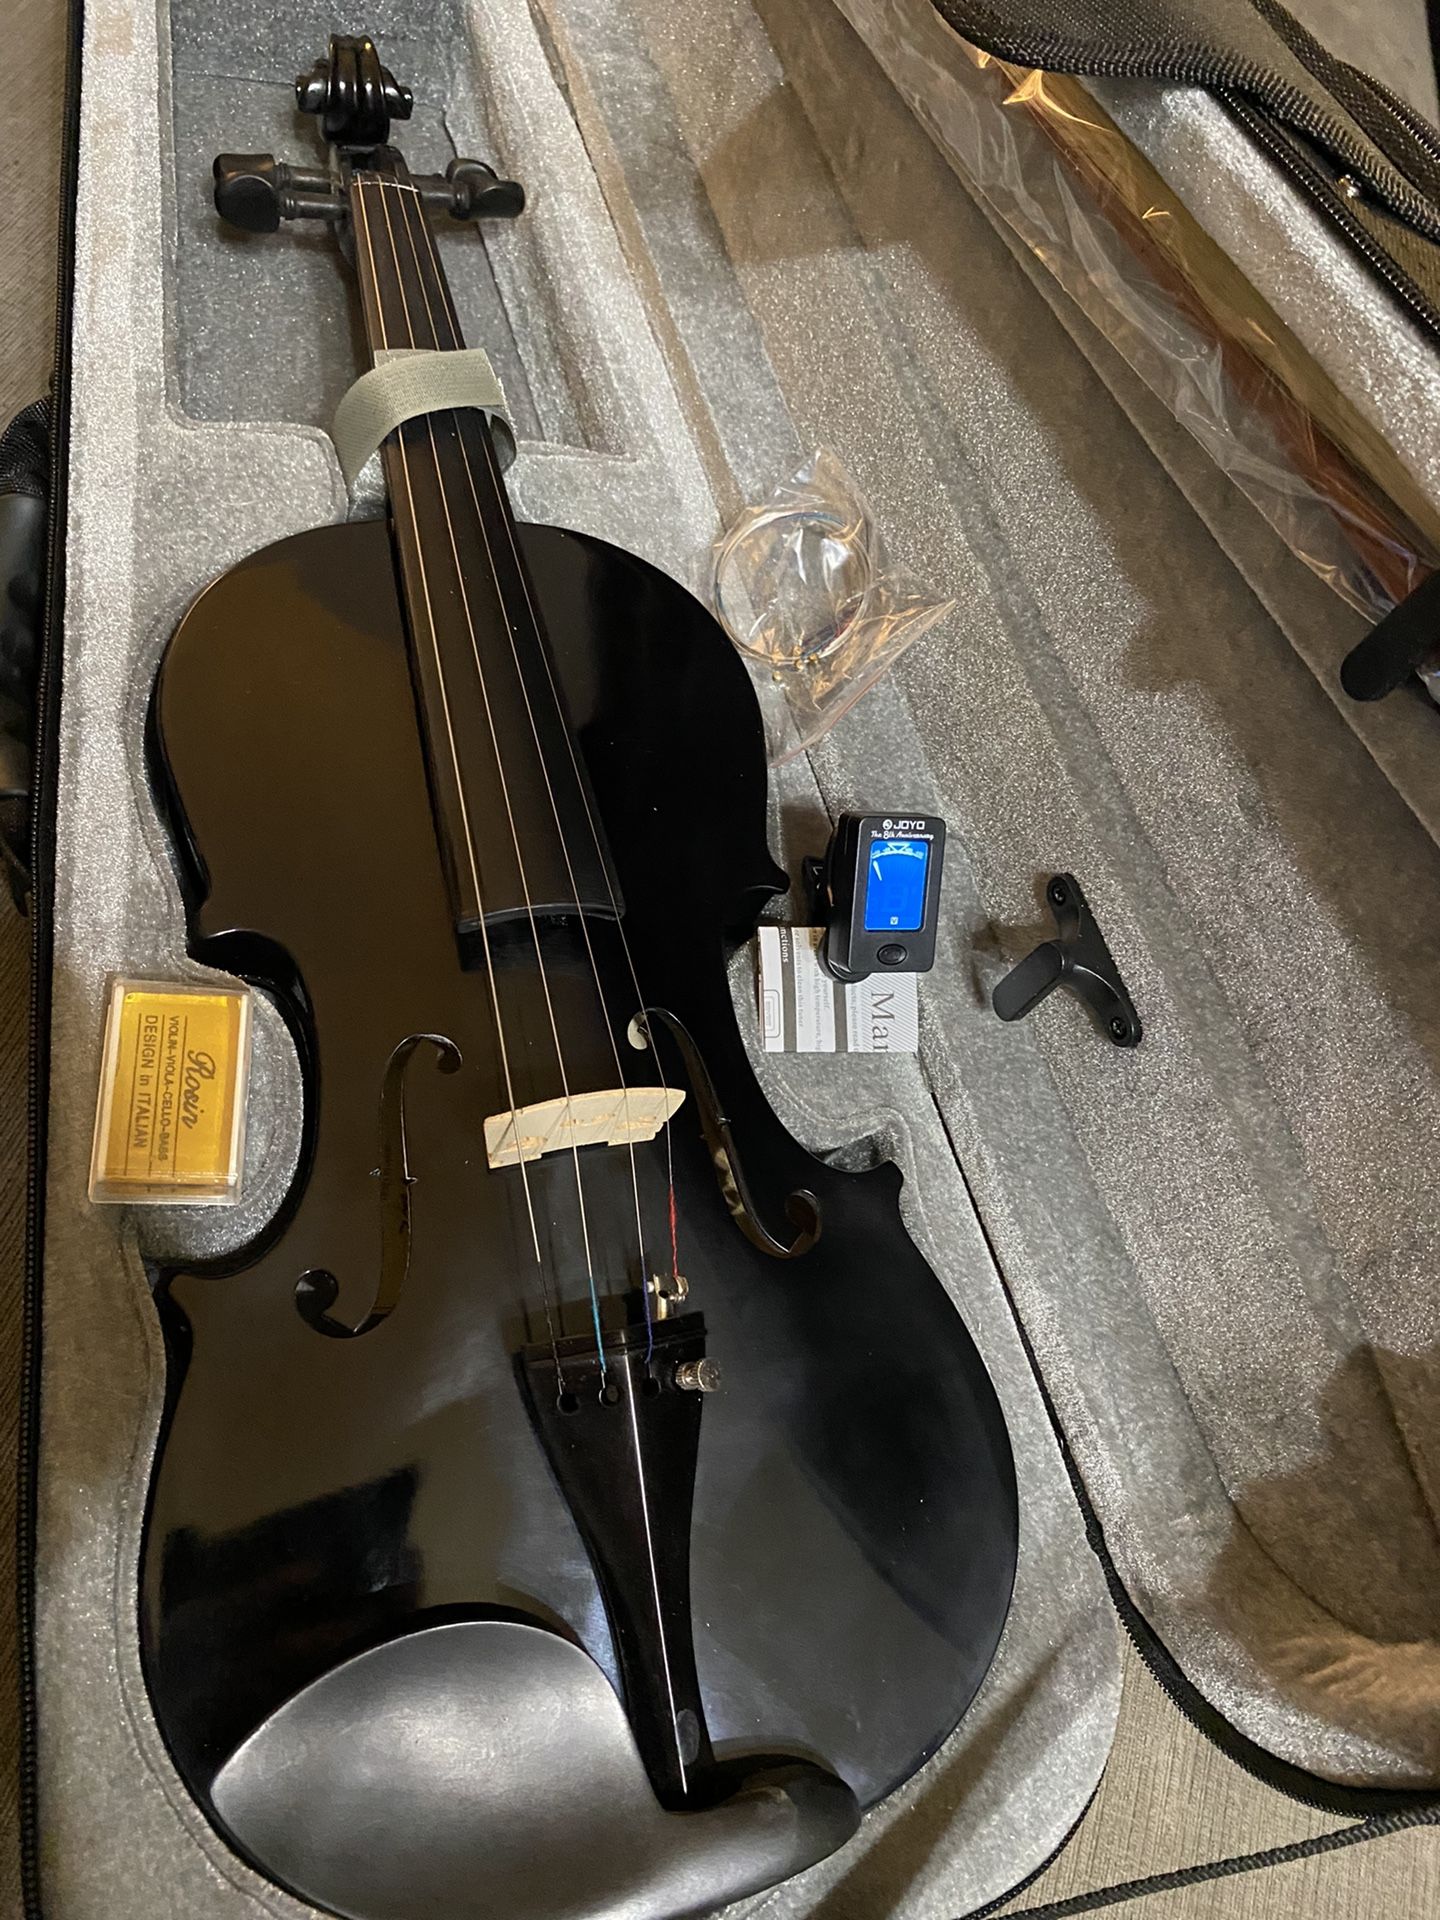 4/4 Full Size Black Violin with New Bow, Digital Tuner, Extra Strings $120 Firm